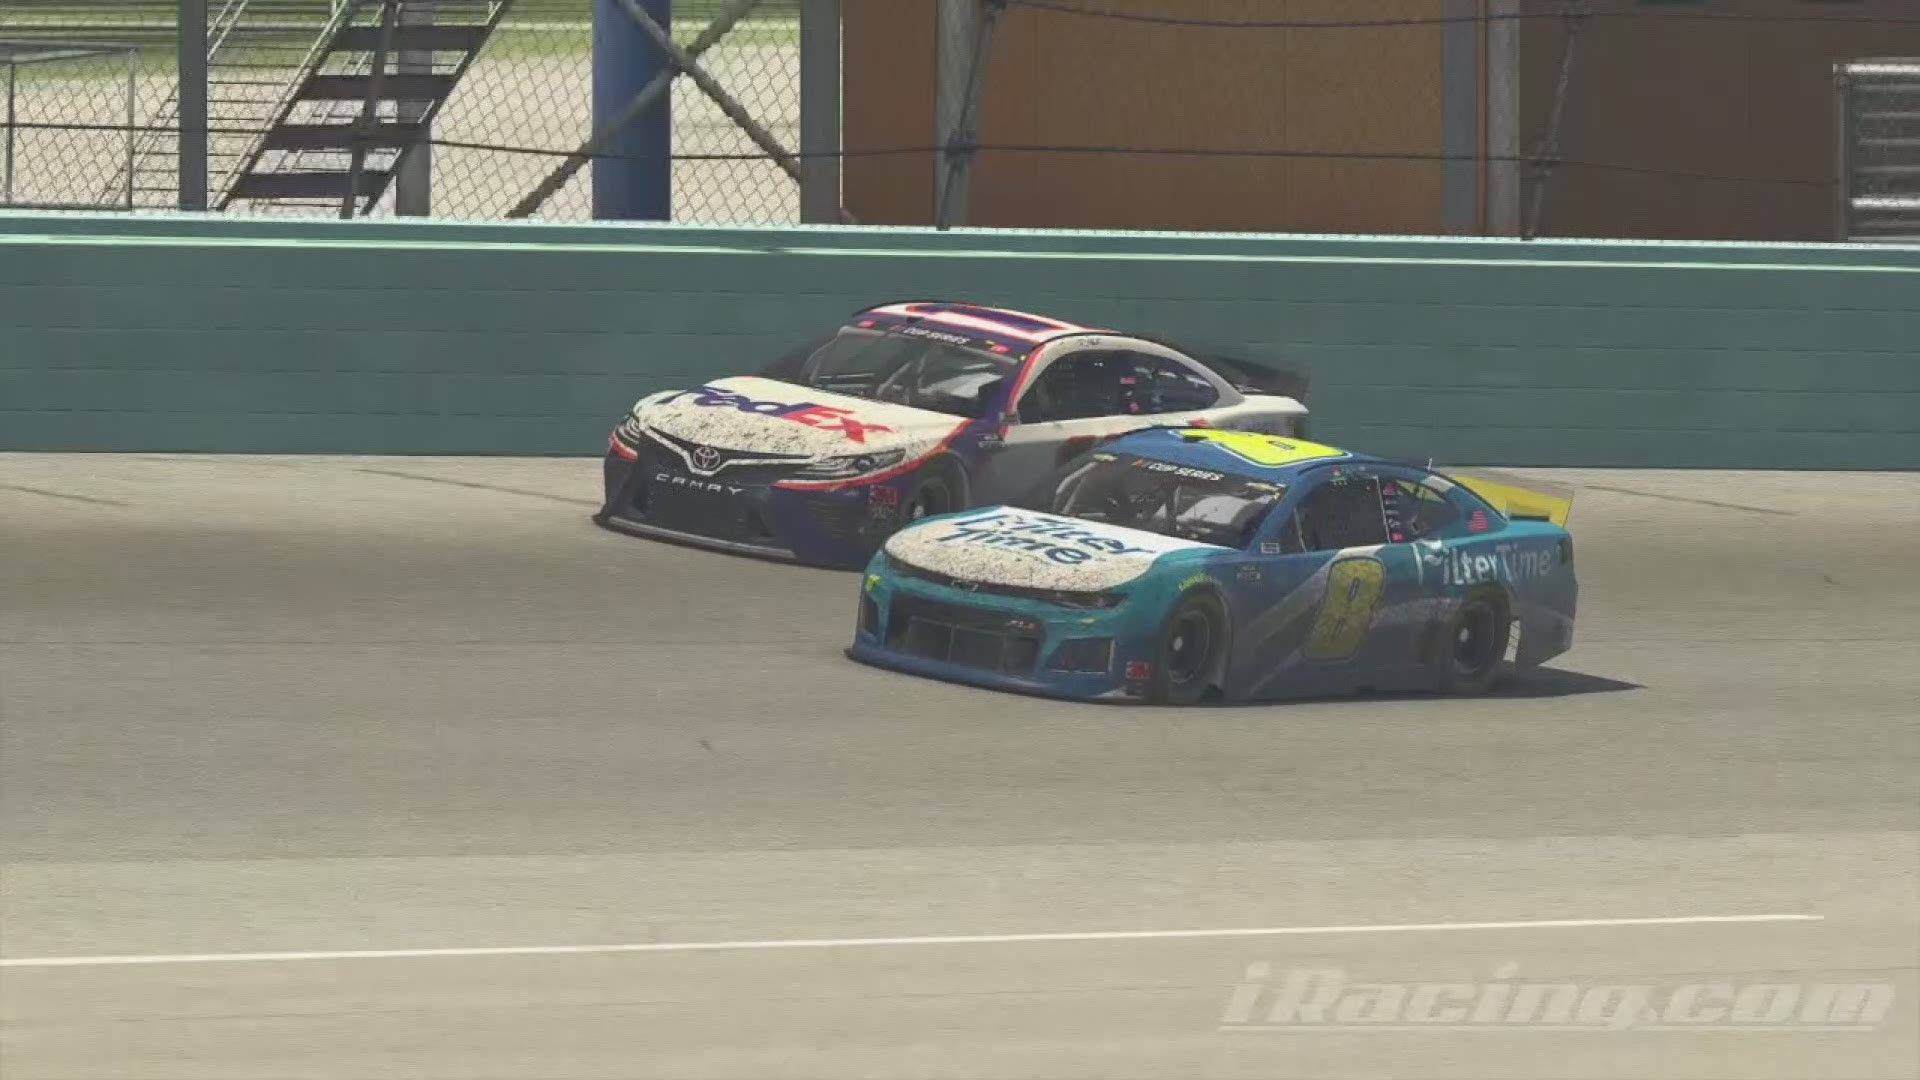 Following NASCAR's announcement to suspend until May 8, the iRacing Pro Invitational Series made its debut on March 22 with a full field and to a record audience.